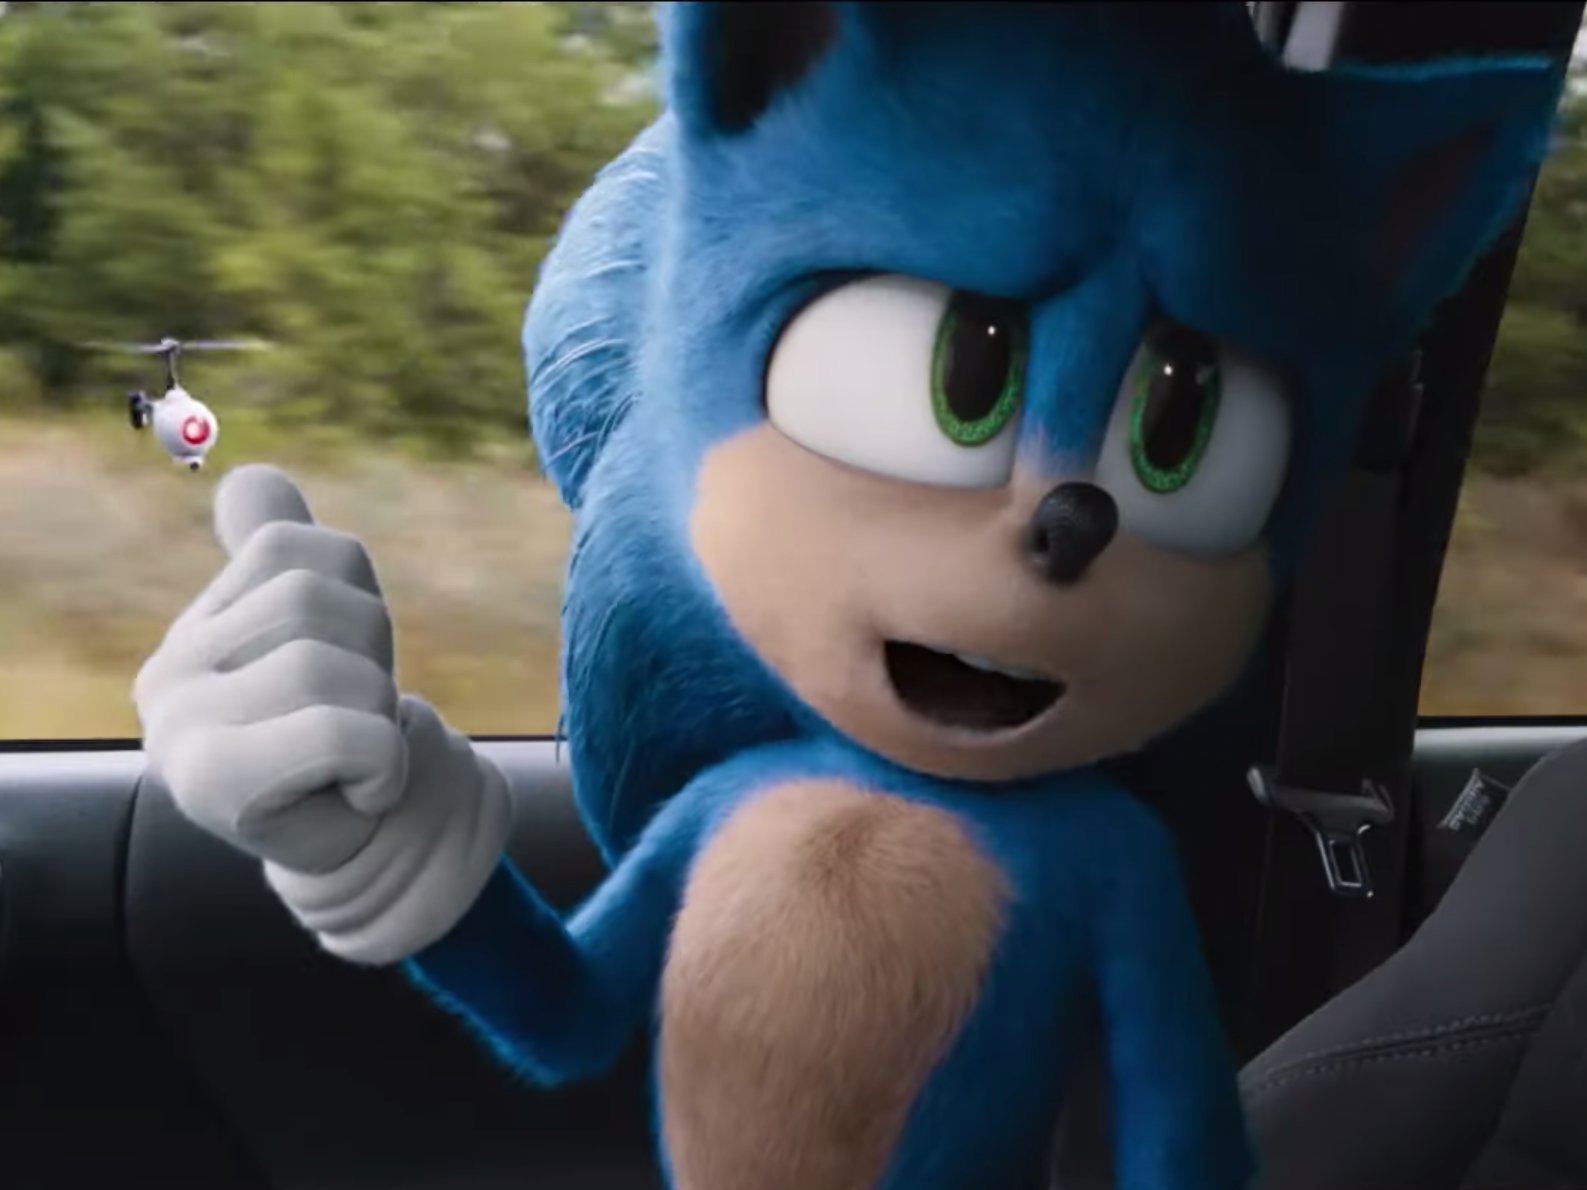 Sonic the Hedgehog' Movie Delayed to 2020 to Change Sonic's Look